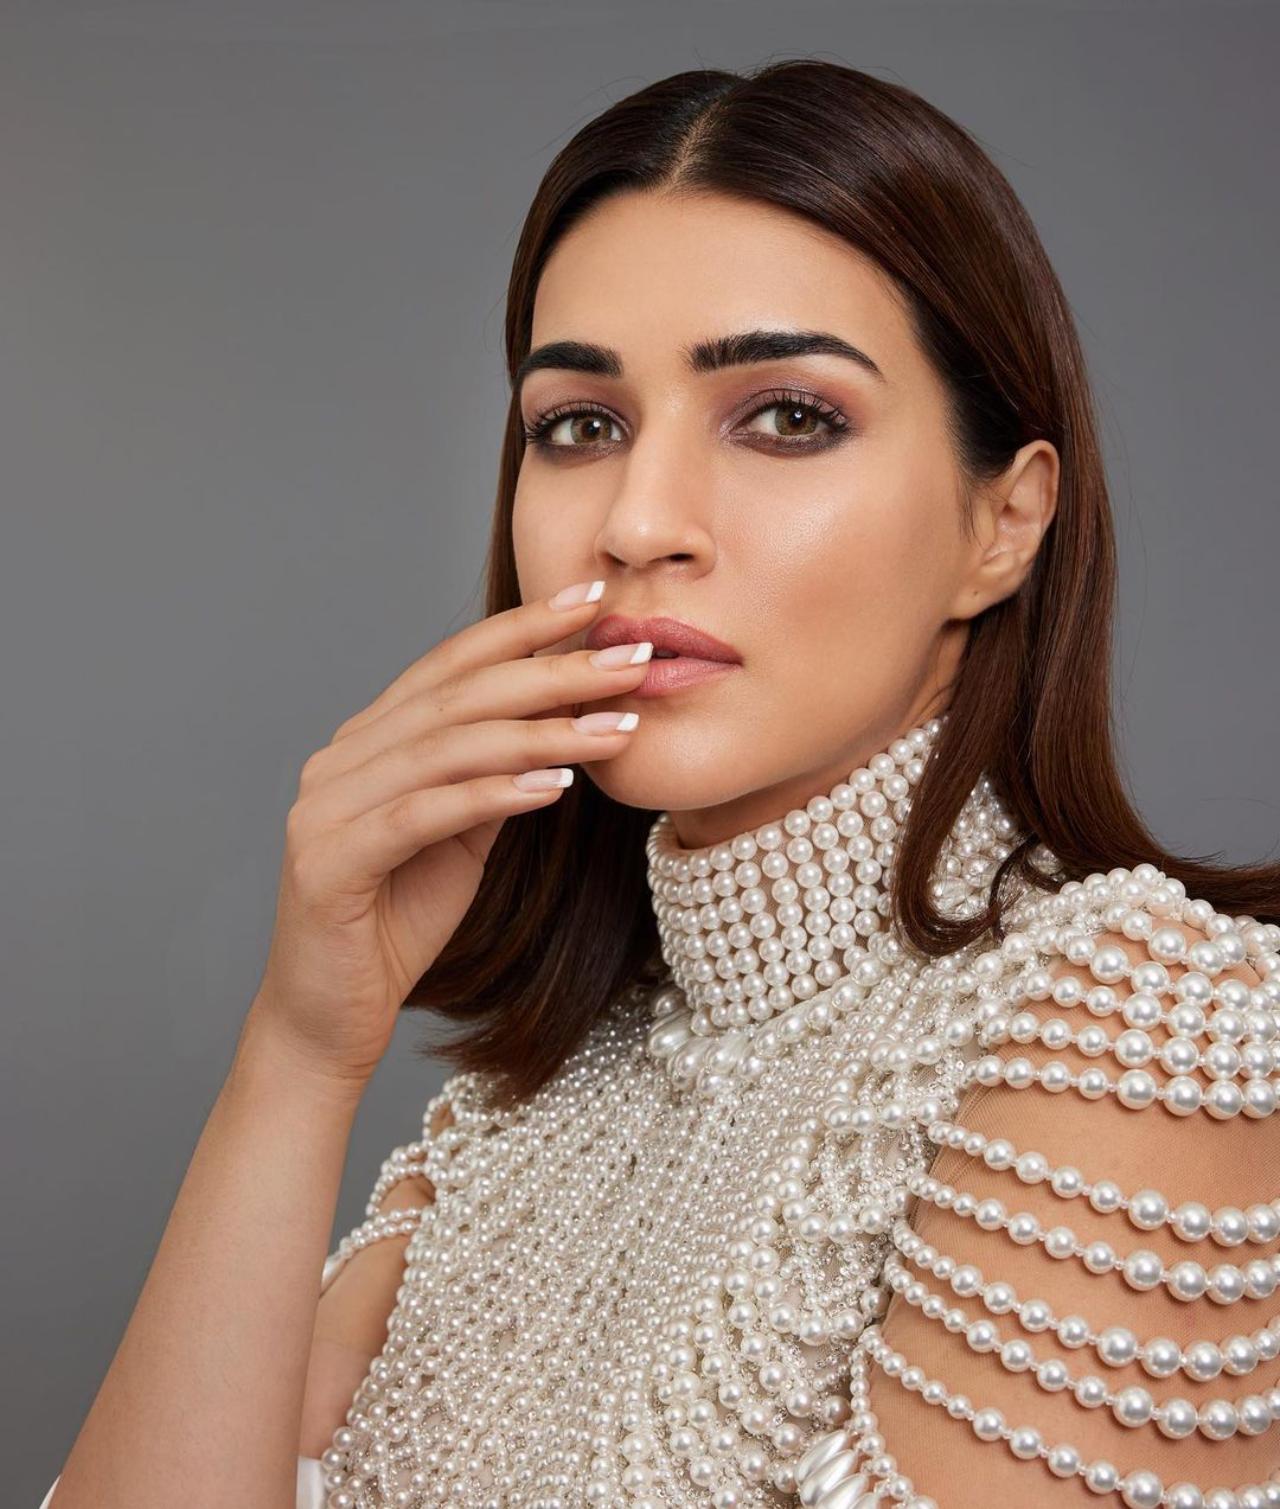 Kriti opted for smoky eyes and nude lipstick and subtle make-up apart from the eyes. With the pearl blouse, Kriti ditched any other kind of accessory and left her hair open with a middle partition